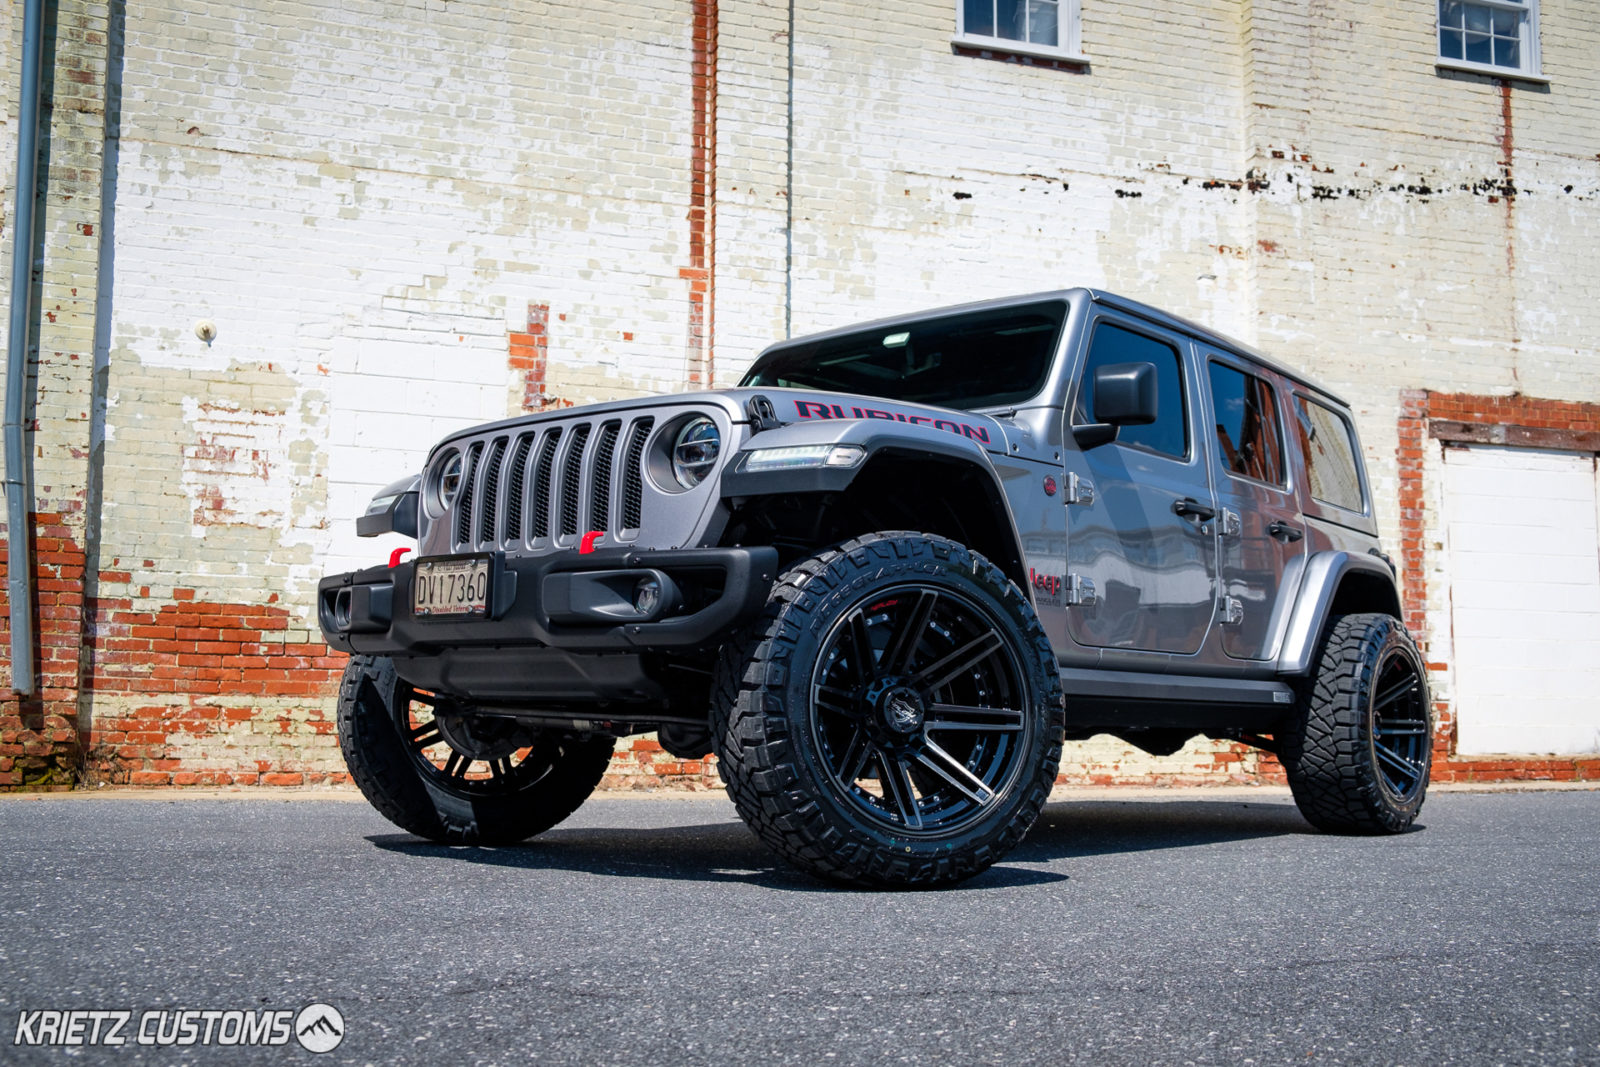 Lifted 2020 Jeep Wrangler with 22×12 4Play 4P08 Wheels and  Inch JKS  Suspension Lift Kit | Krietz Auto